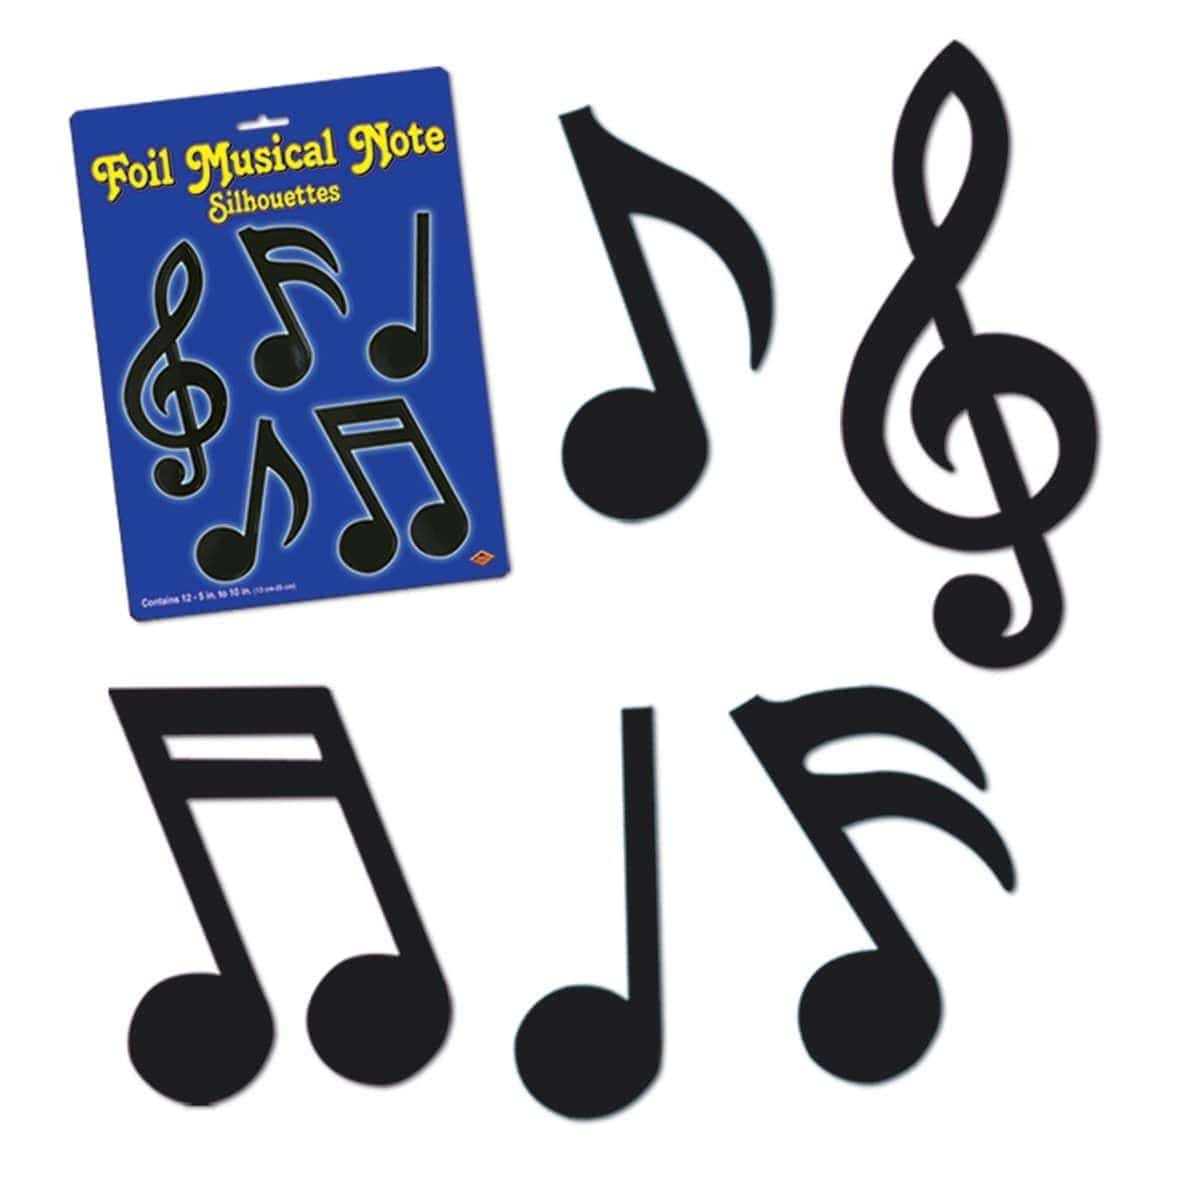 Buy Theme Party Foil Musical Notes Cutouts sold at Party Expert